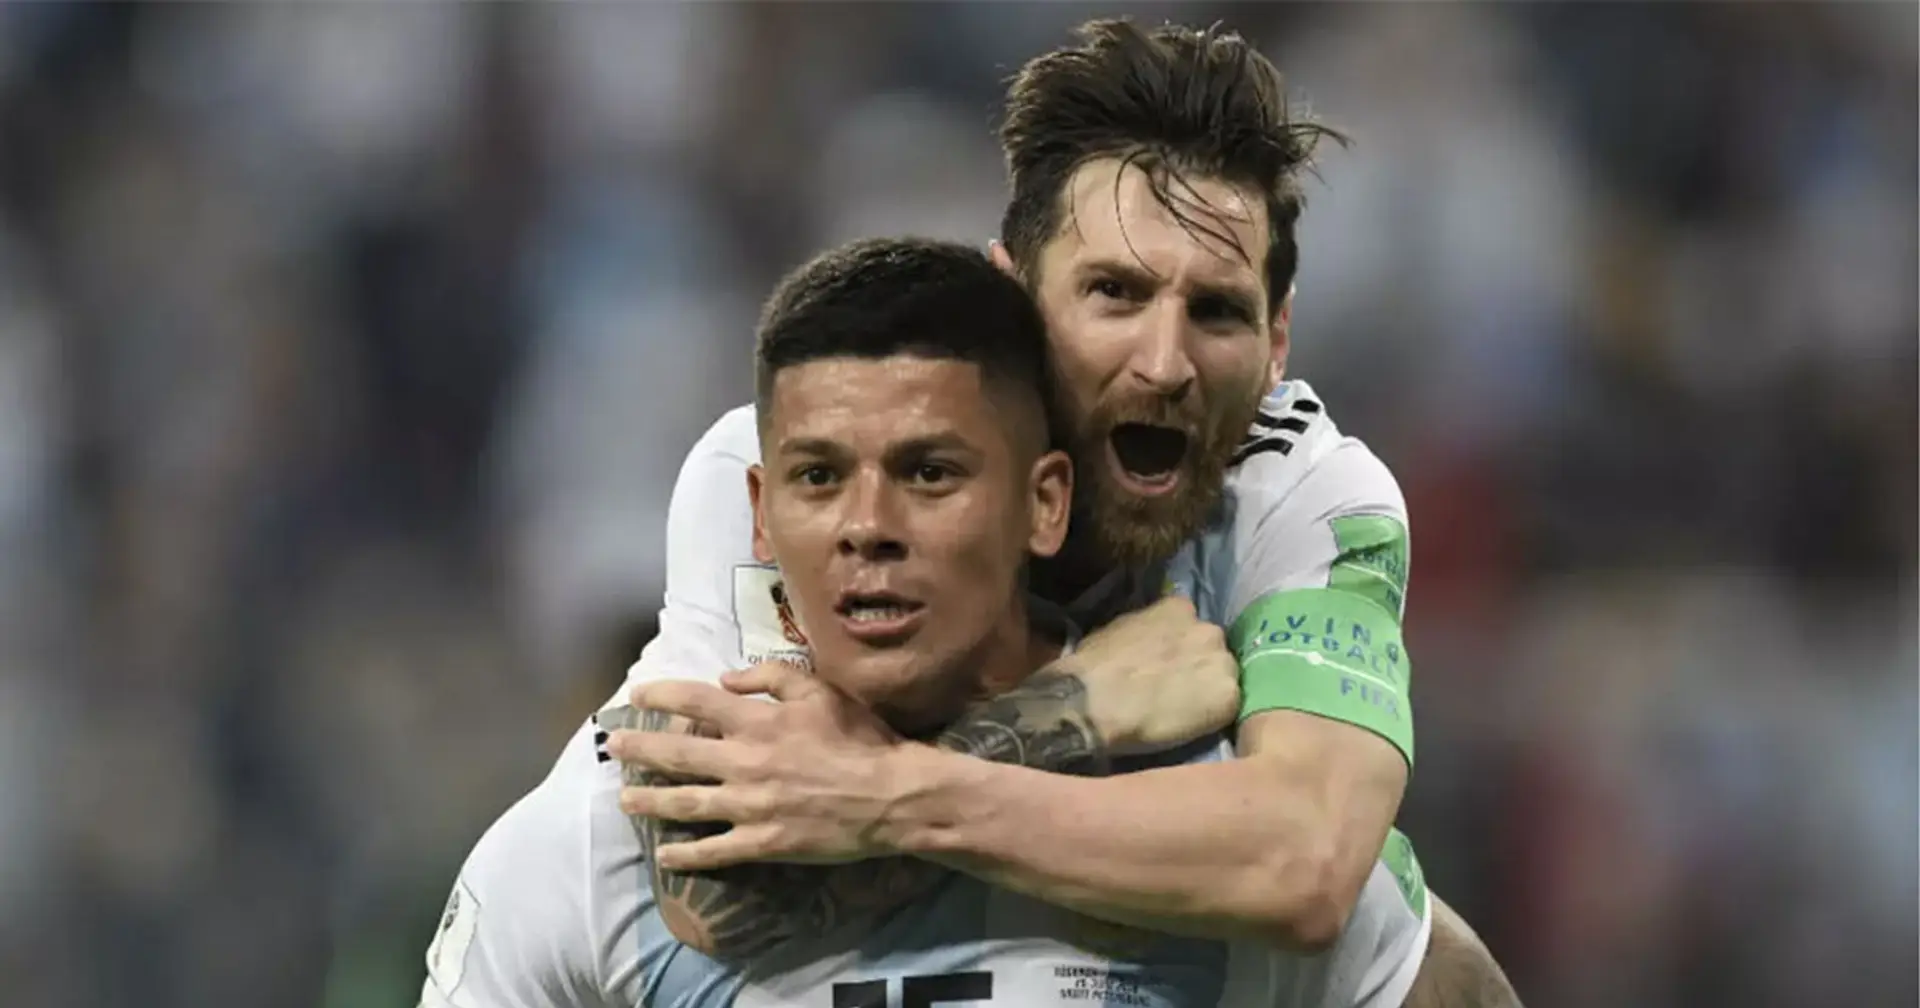 'The grandfather carrying him, ha!': Messi's Argentina teammate Marcos Rojo picks very special World Cup episode as the one he'll show his grandkids